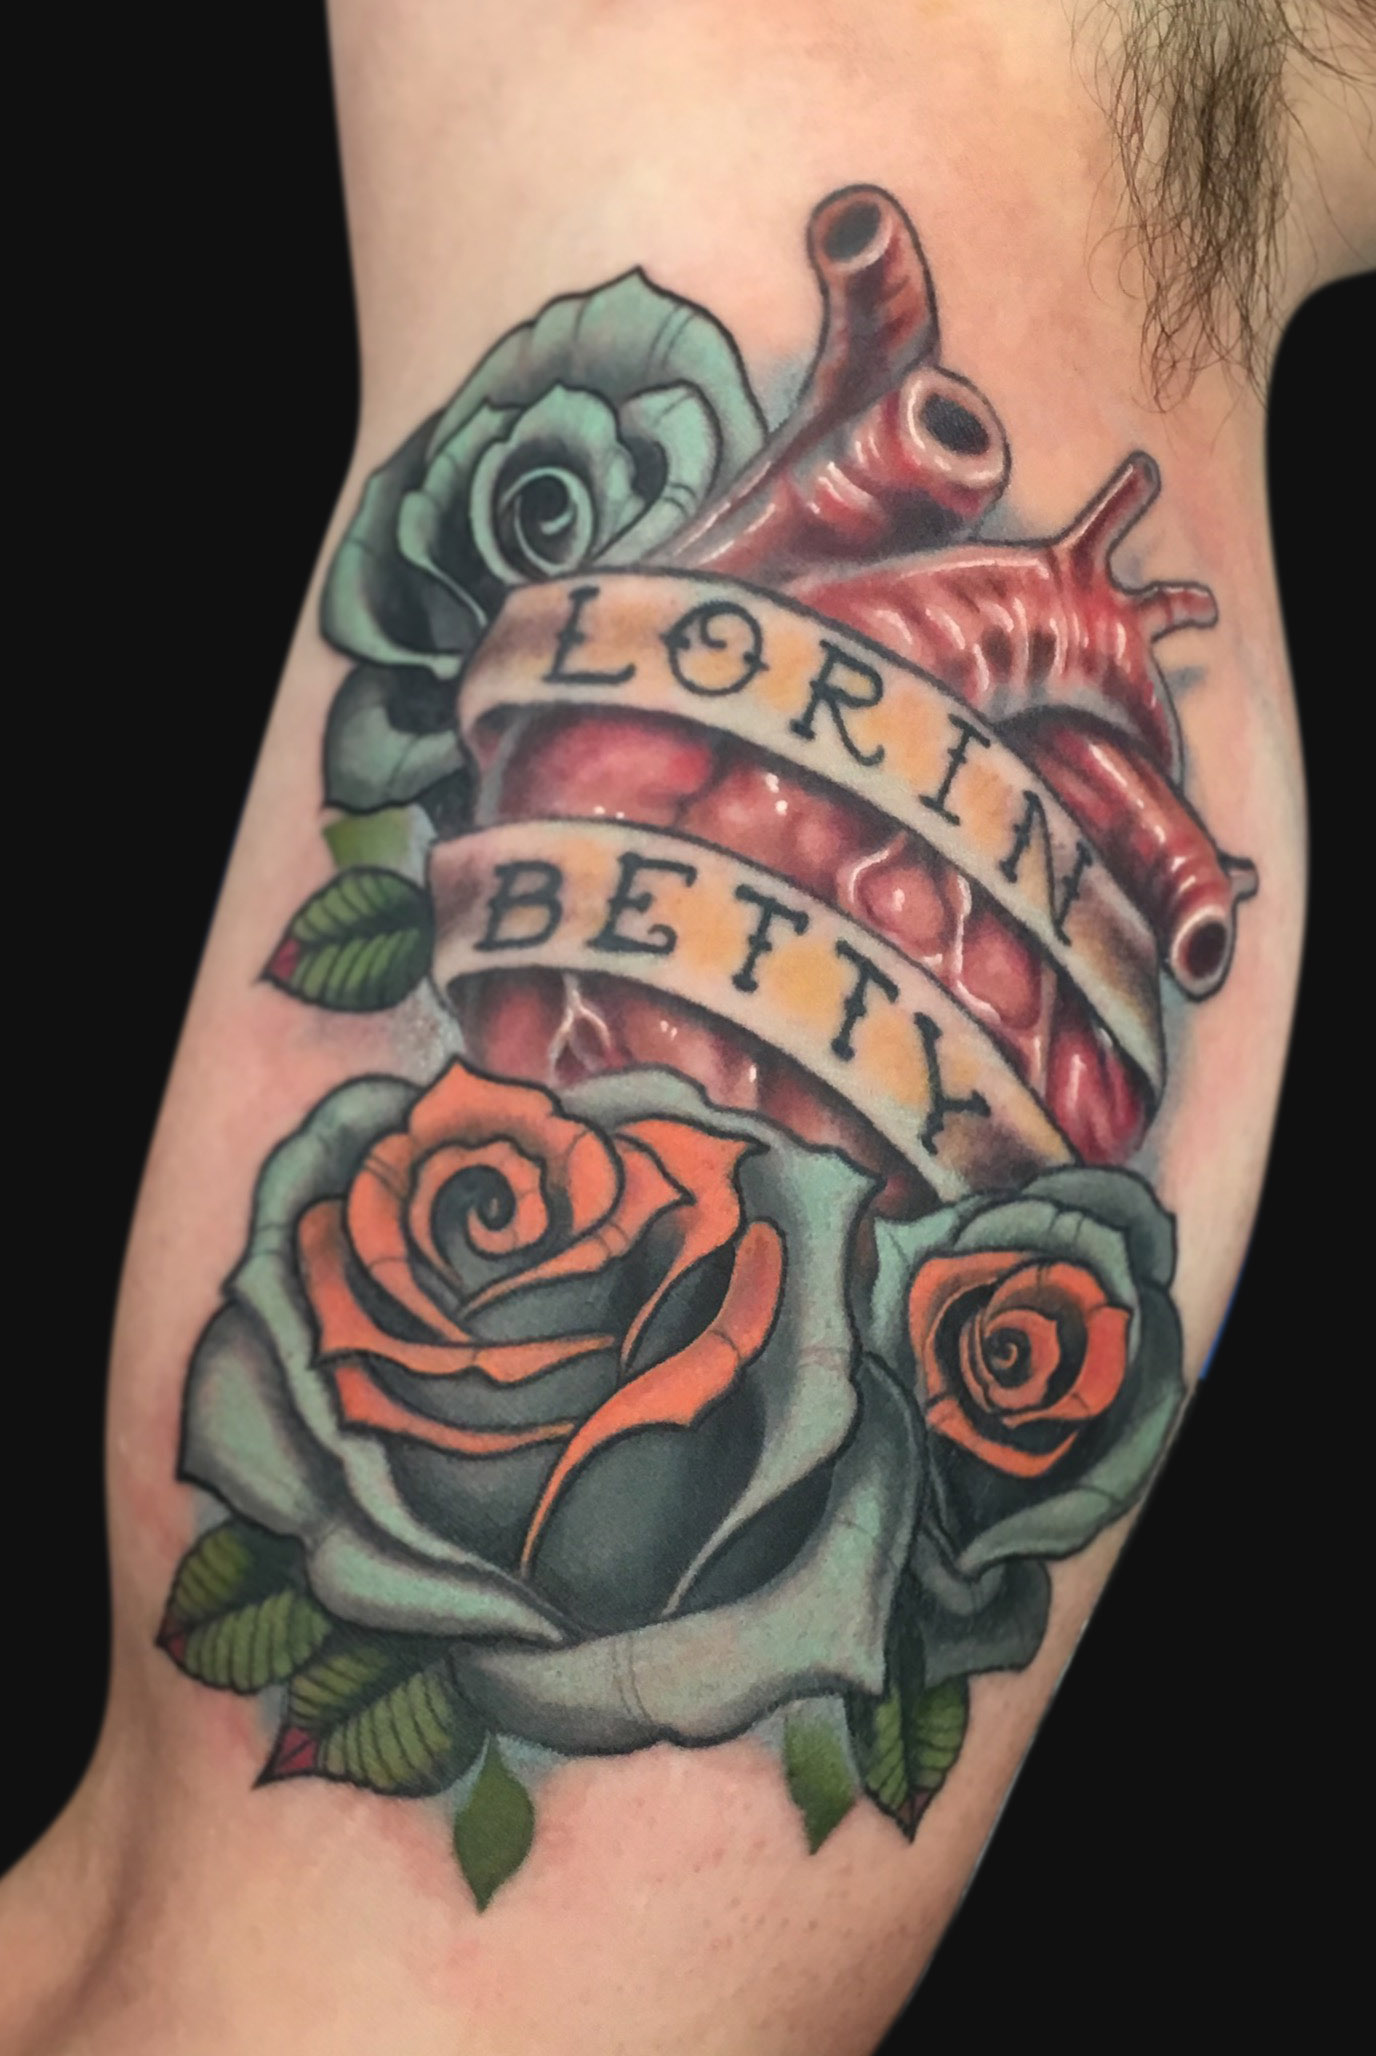 Amazing Real Heart With Roses And Banner Tattoo On Bicep By Spencer Caligiuri